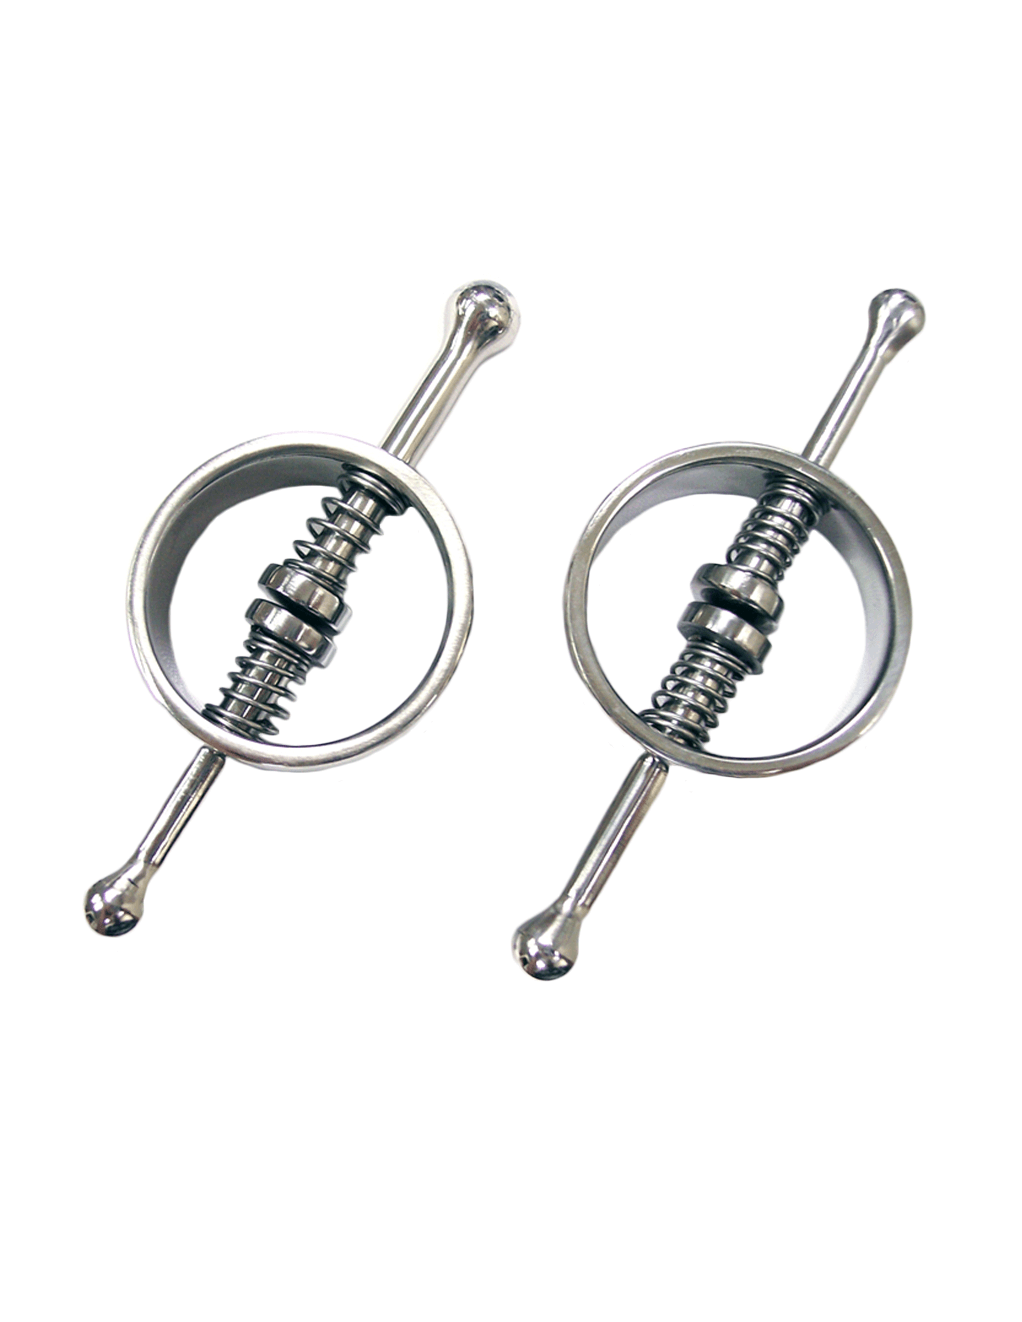 Rouge Stainless Steel Round Clamps - Silver - Top